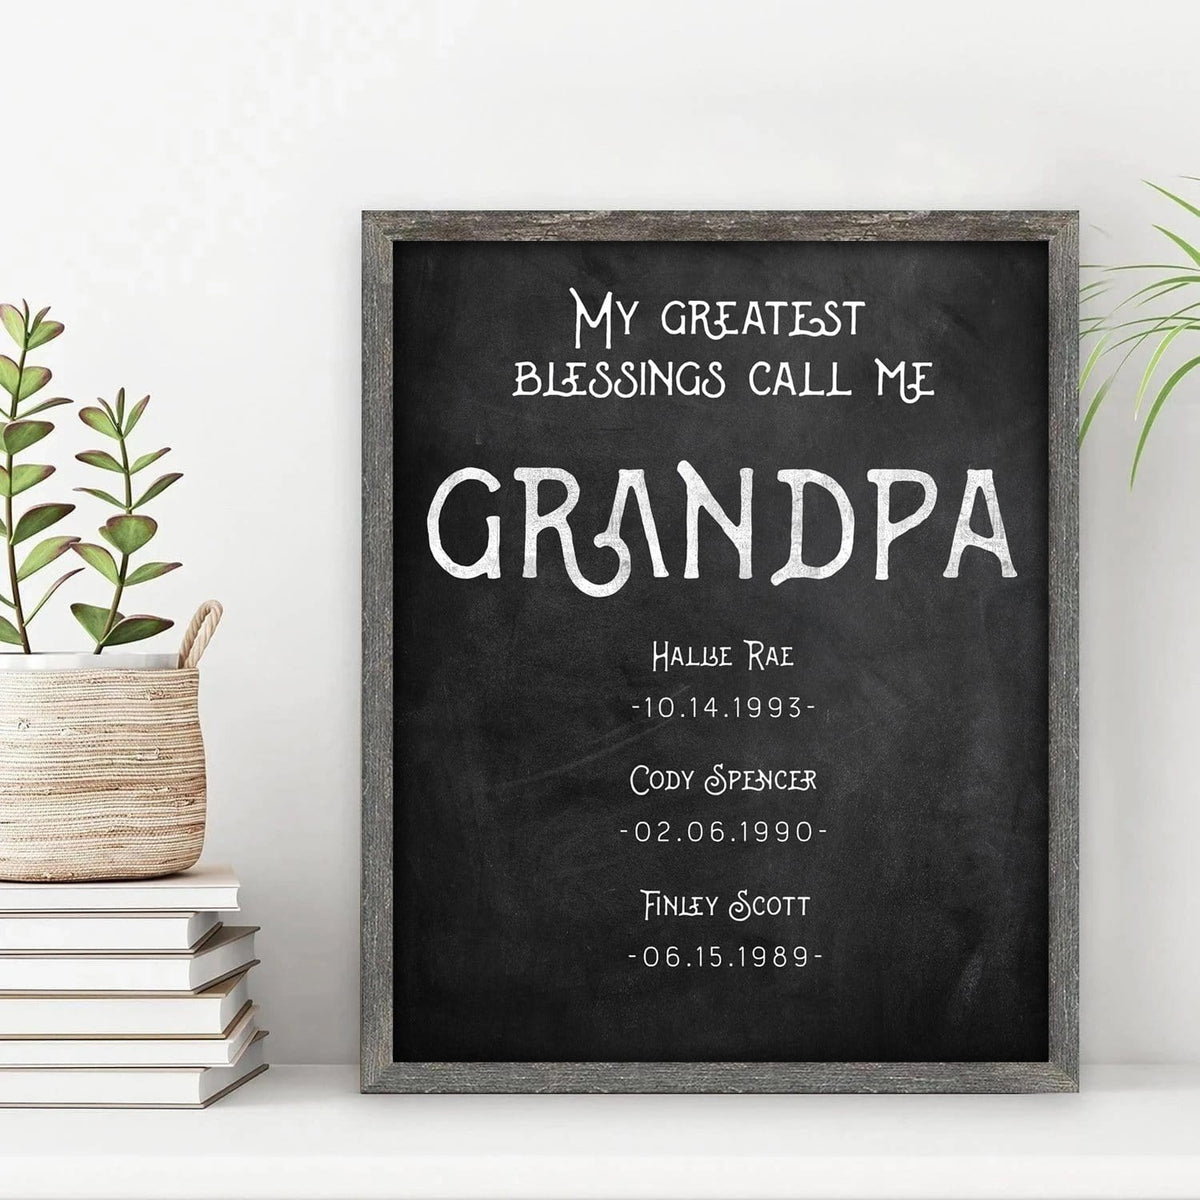 Framed Canvas - Personalized Grandpa Gift from Personal Prints